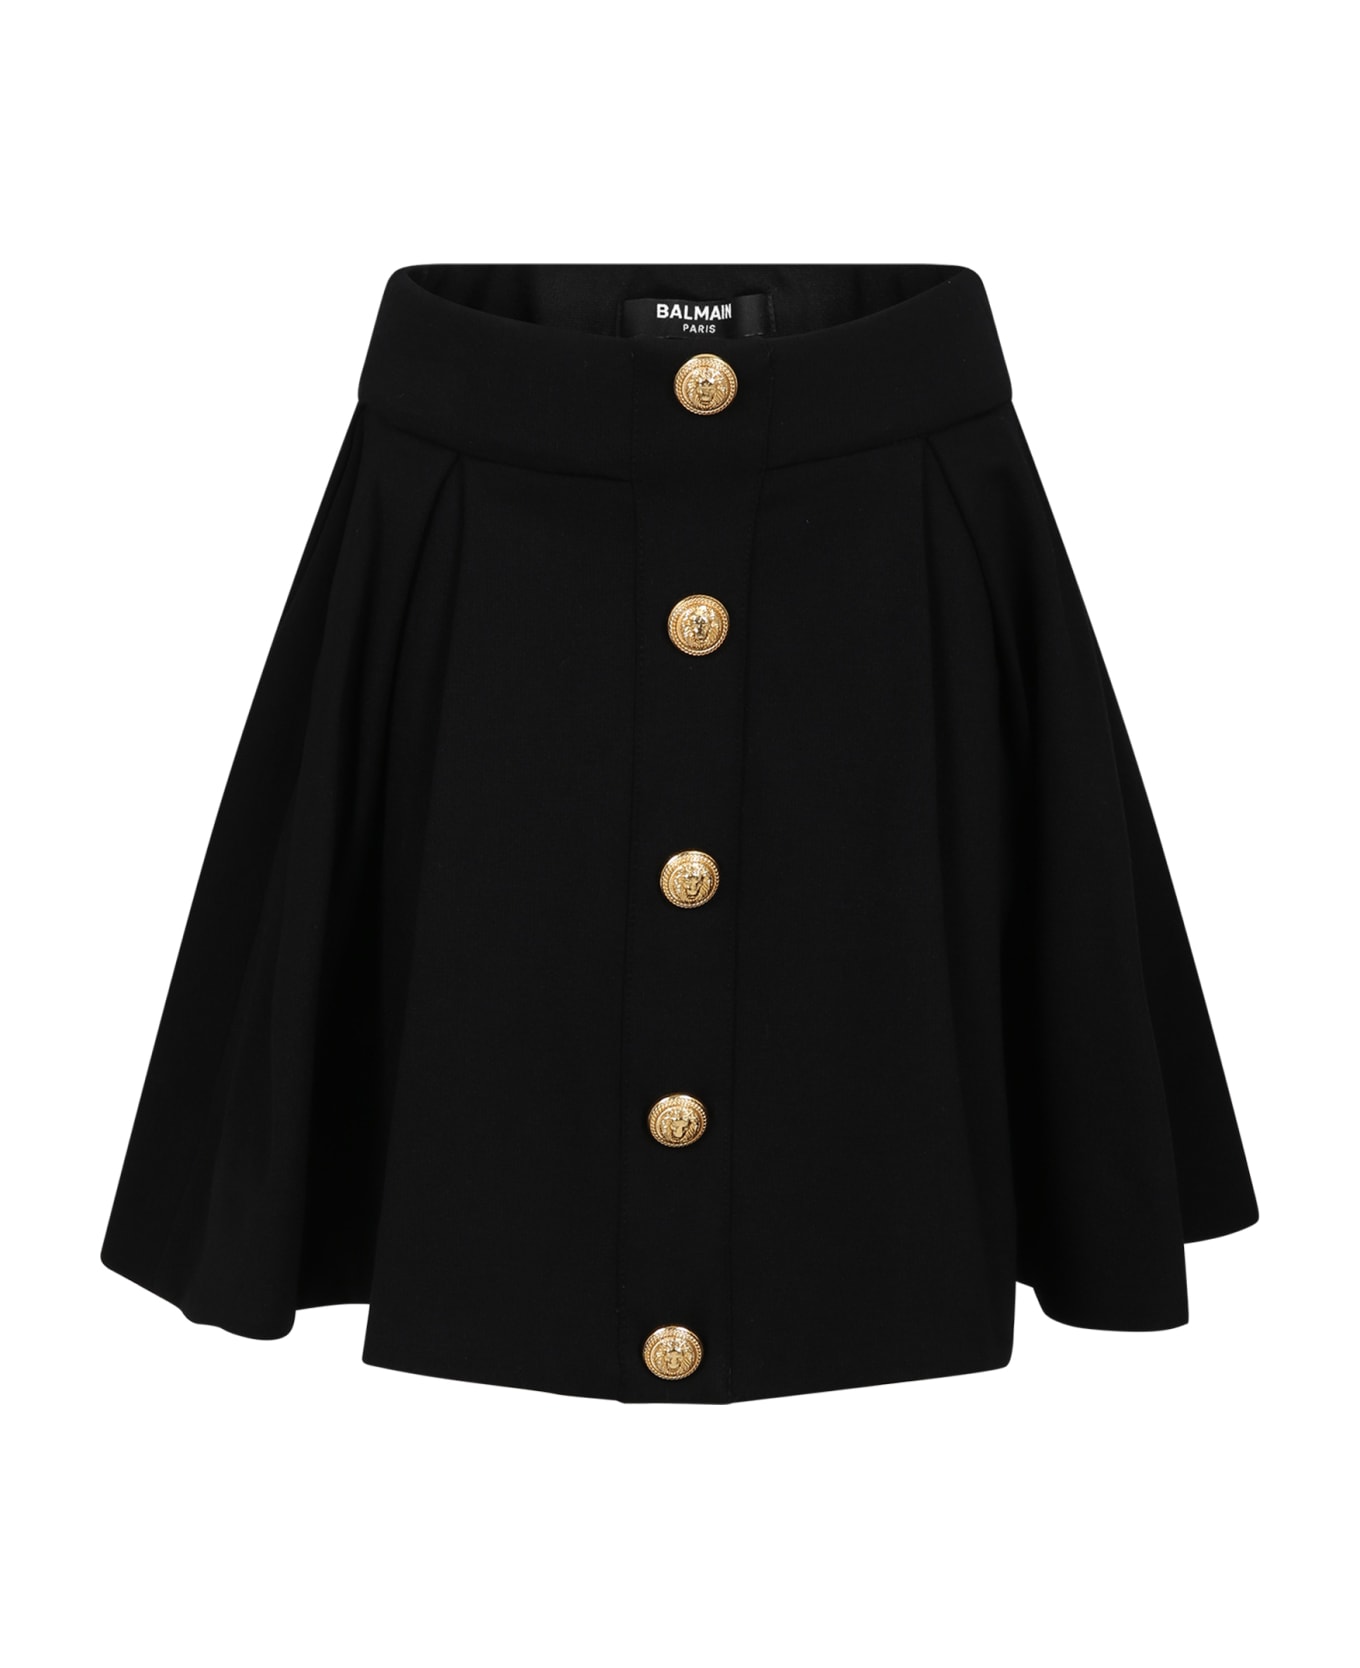 Balmain Black Skirt For Girl With Iconic Buttons - Black ボトムス